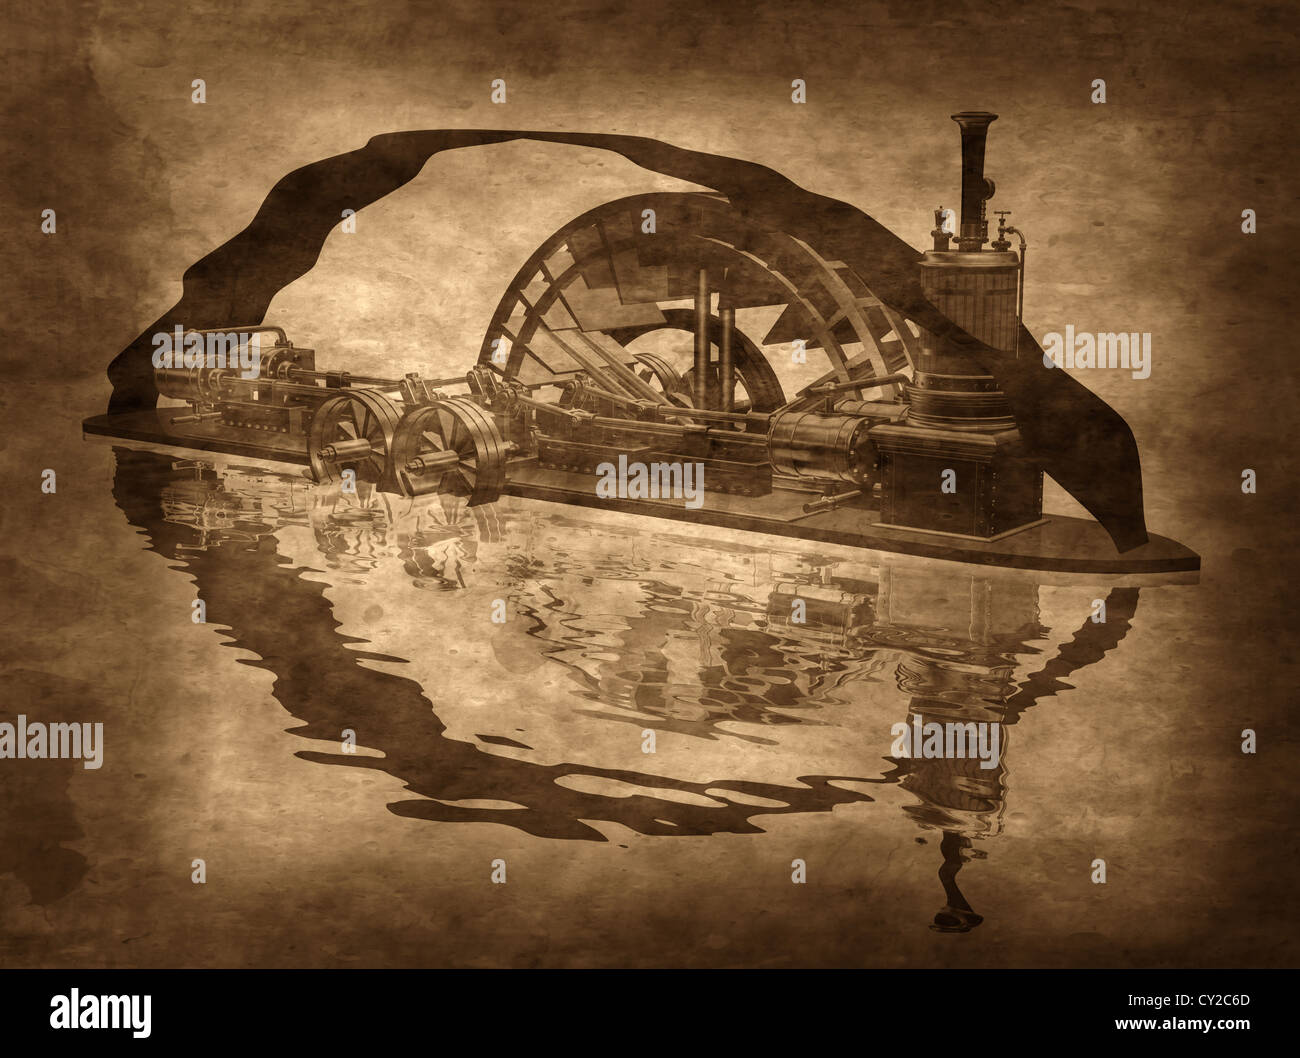 Illustration of a grungy steampunk riverboat on a sepia background Stock Photo